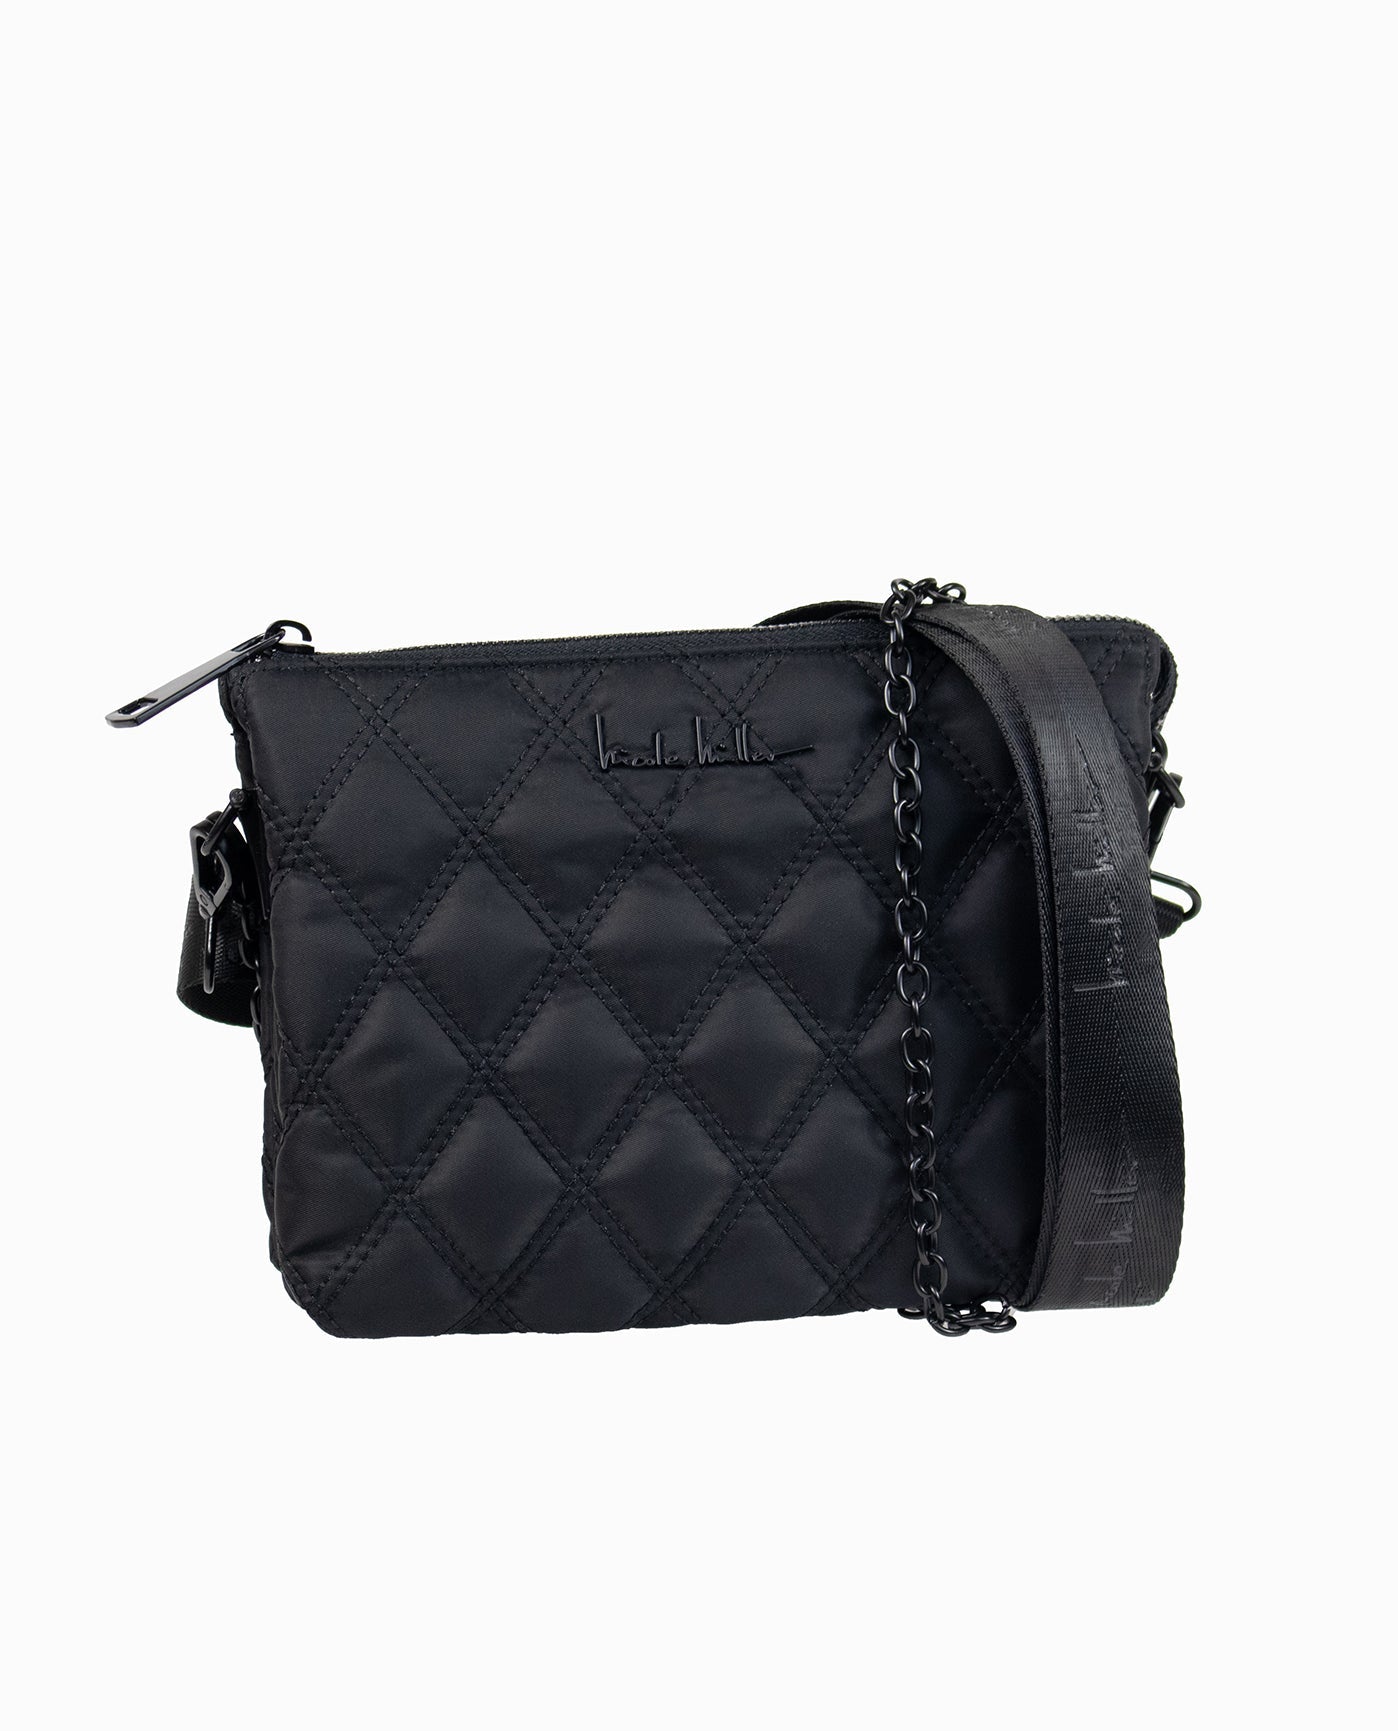 FRONT OF QUILTED NYLON CROSSBODY BAG | Black